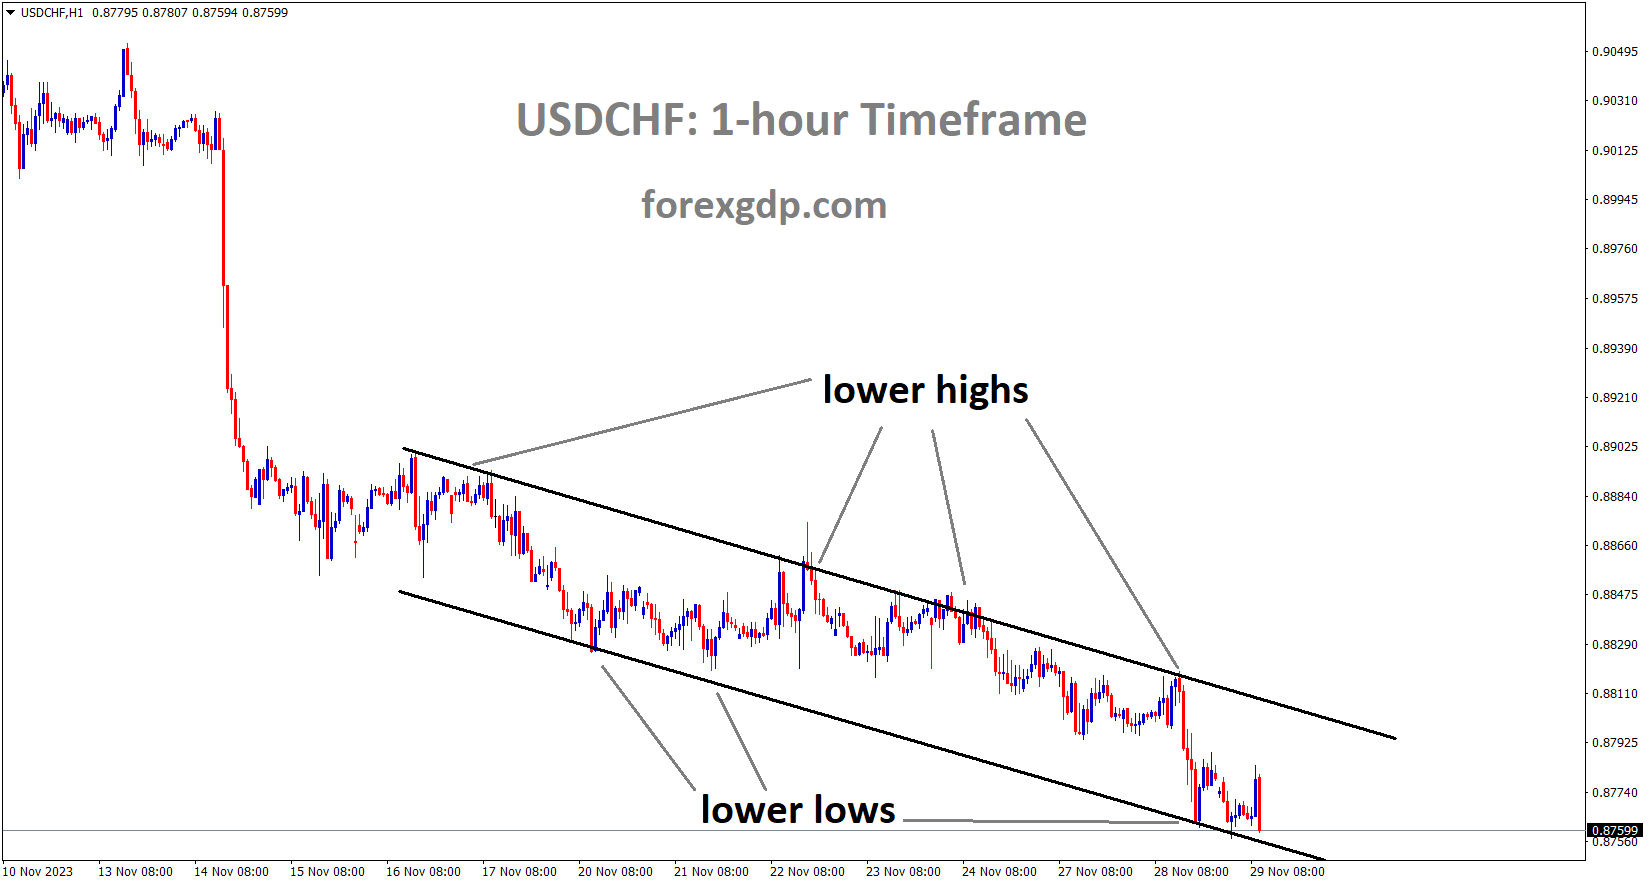 USDCHF is moving in the Descending channel and the market has reached the lower low area of the channel